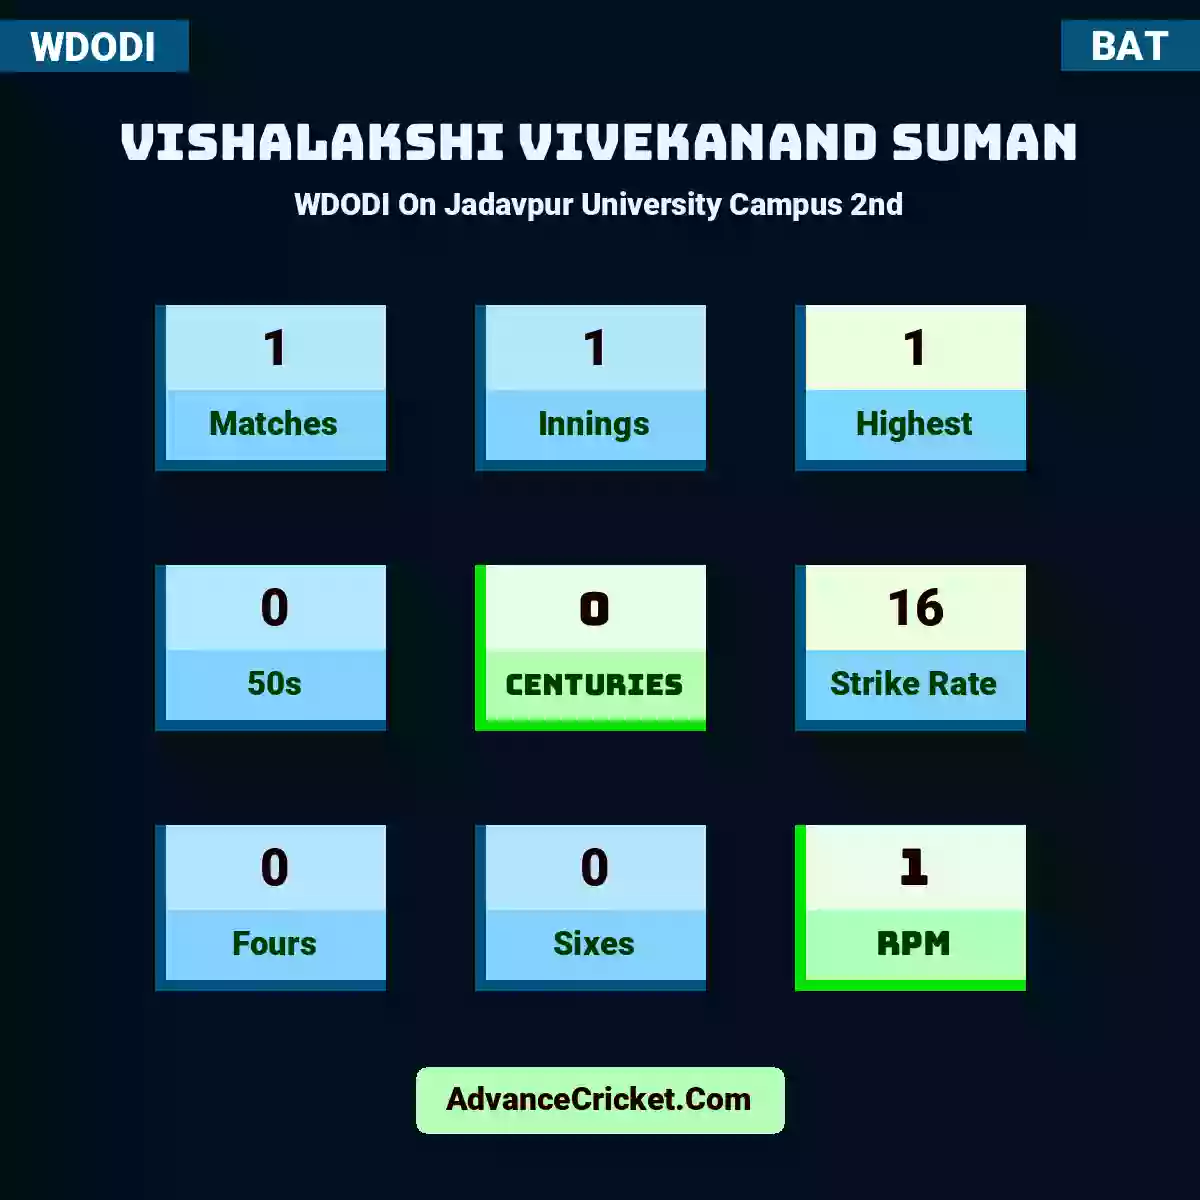 Vishalakshi Vivekanand Suman WDODI  On Jadavpur University Campus 2nd, Vishalakshi Vivekanand Suman played 1 matches, scored 1 runs as highest, 0 half-centuries, and 0 centuries, with a strike rate of 16. V.Suman hit 0 fours and 0 sixes, with an RPM of 1.